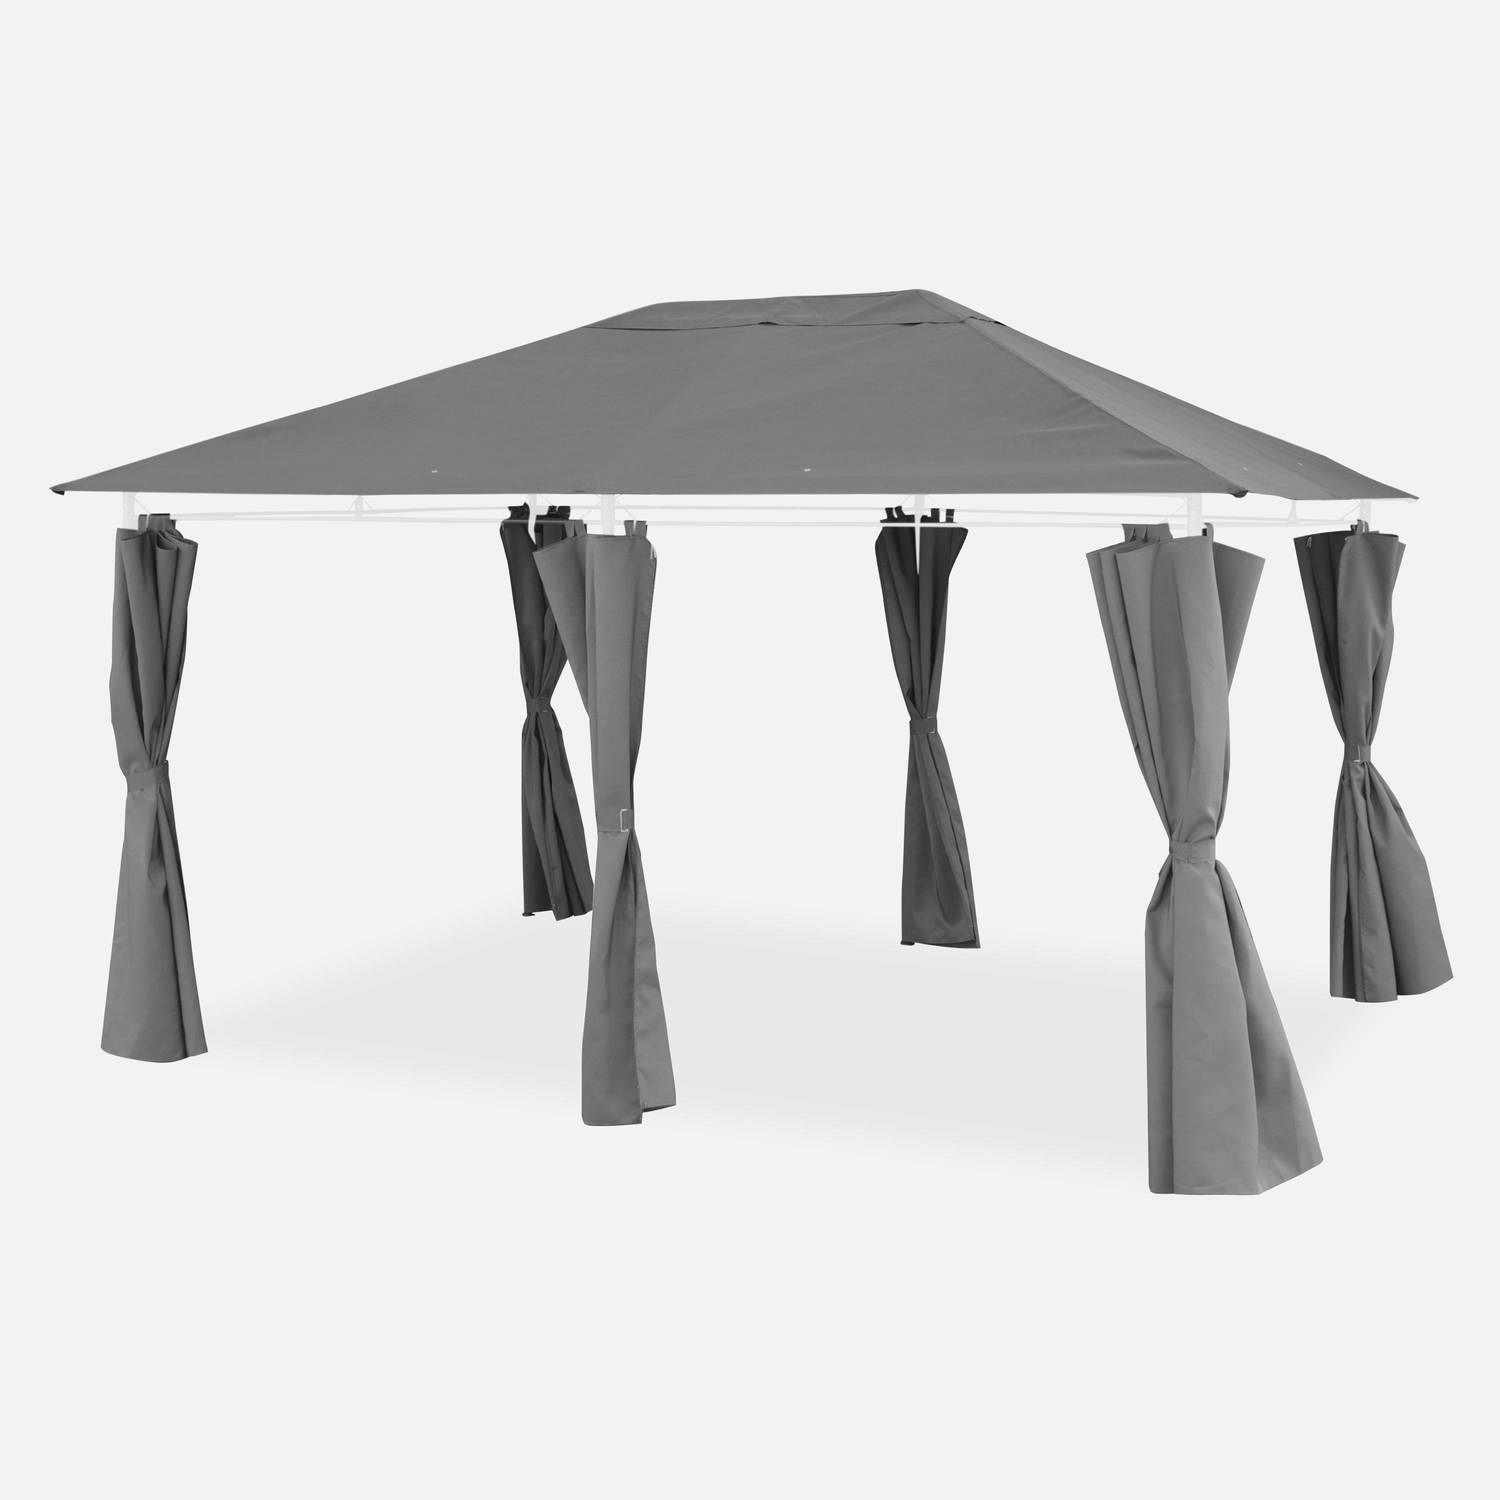 Replacement canopy and side curtain kit for Divio 3x4m gazebo - replacement gazebo canopy and side curtains - Grey Photo1